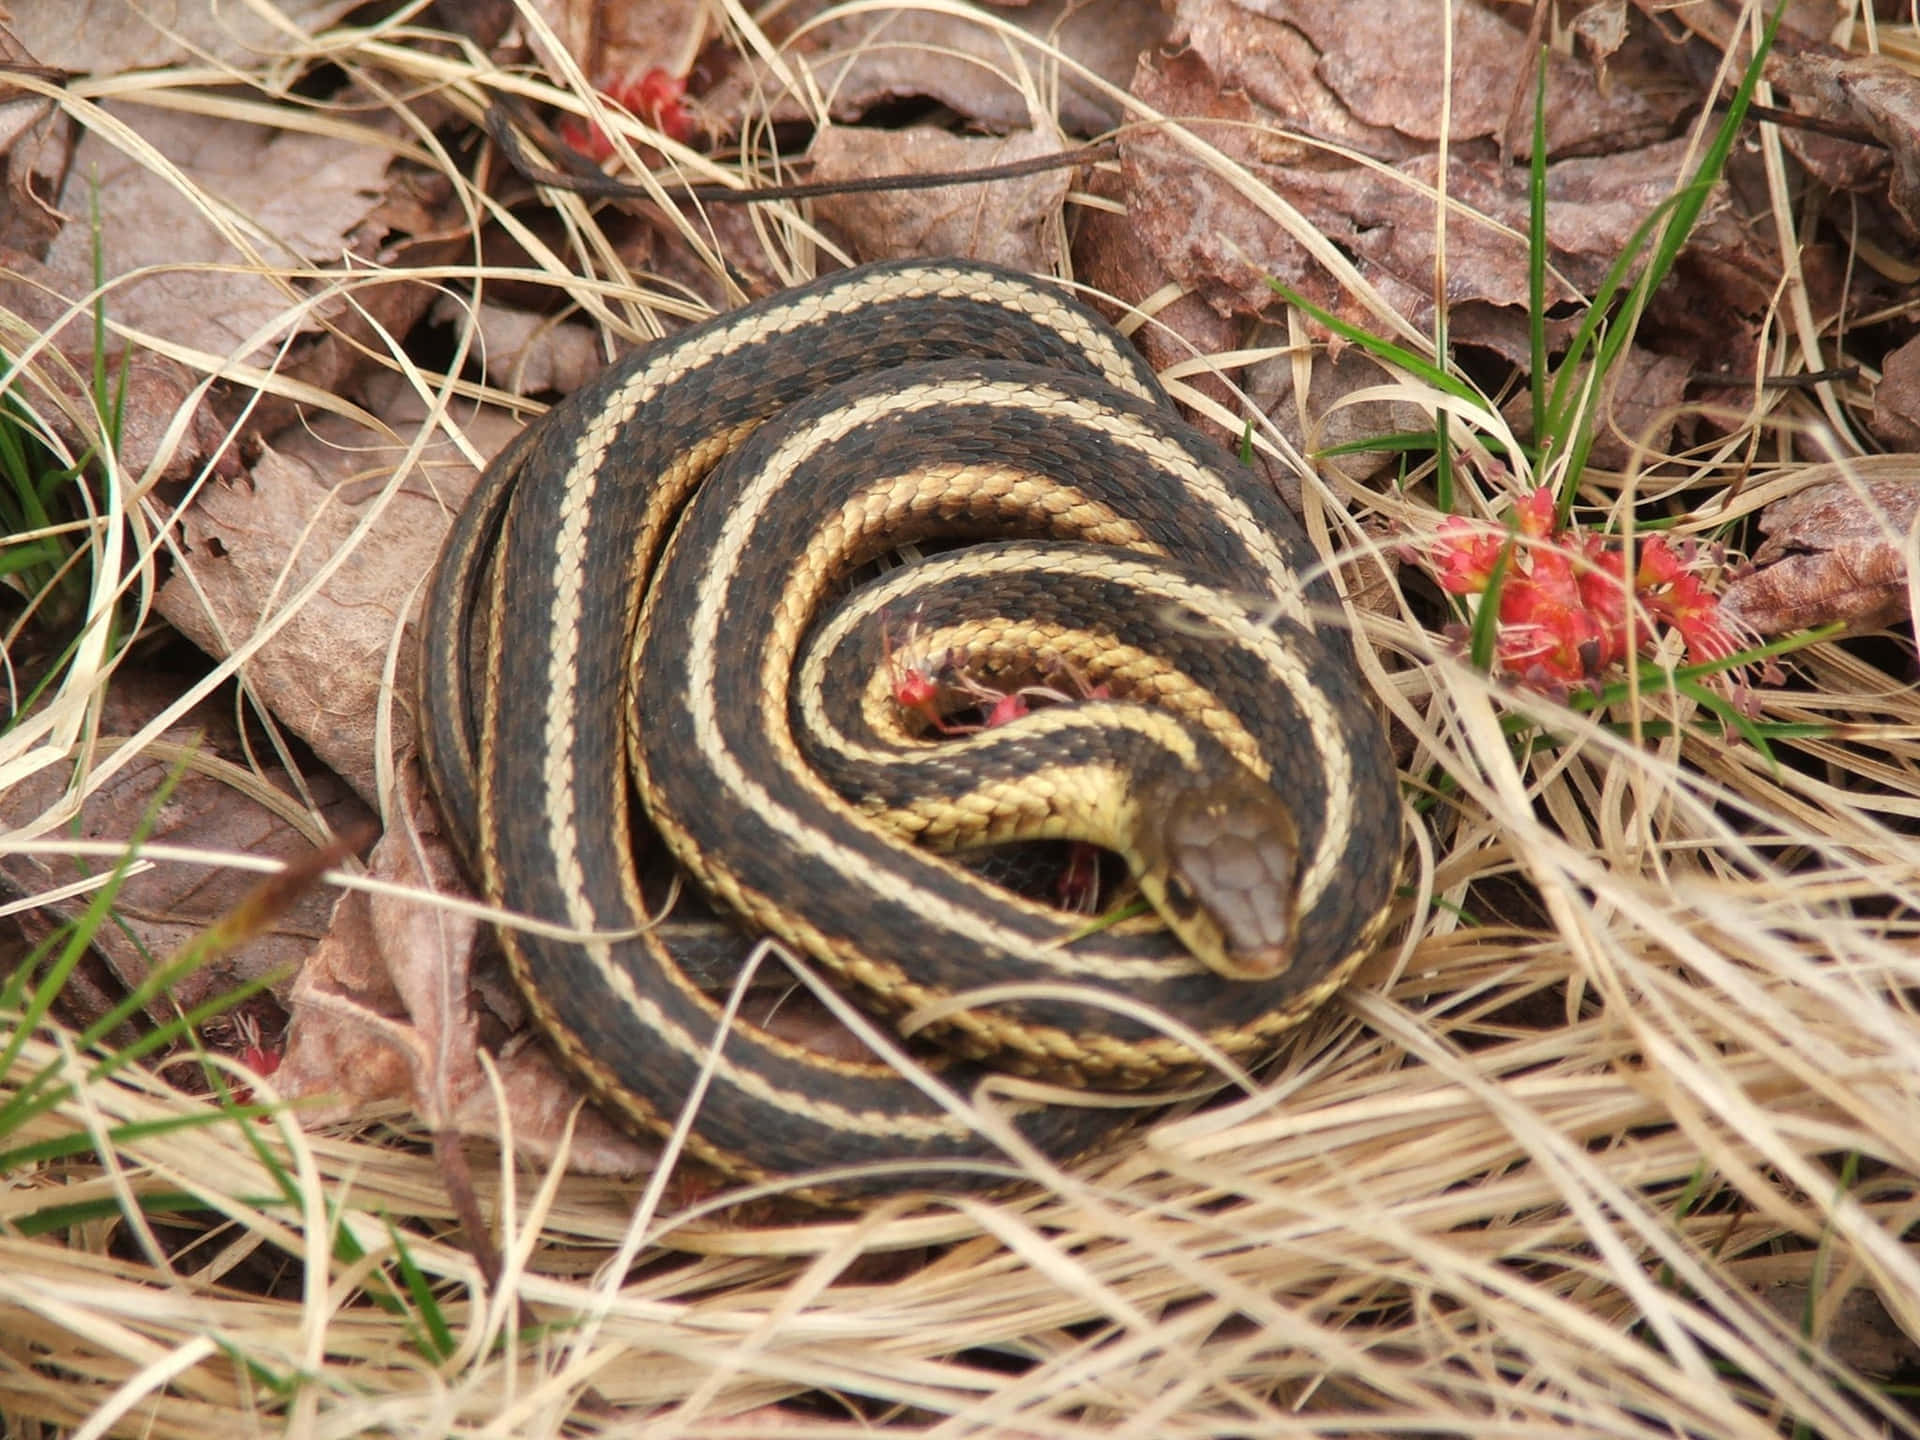 A Snake Curled Up In The Grass